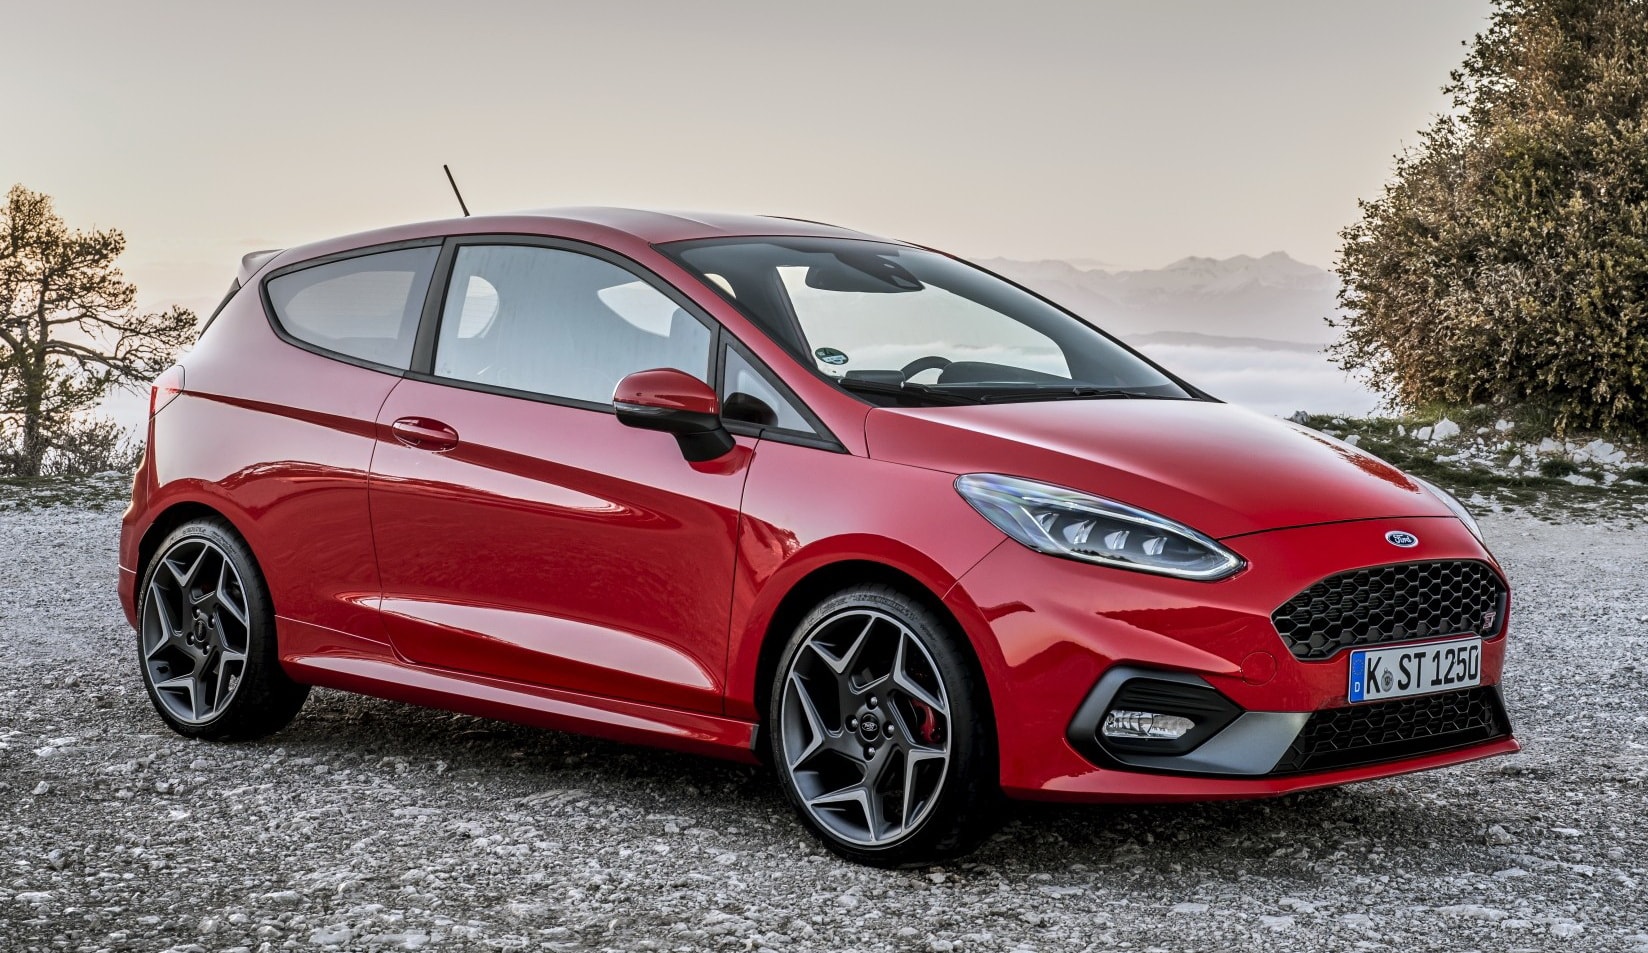 https://s1.cdn.autoevolution.com/images/news/ford-fiesta-production-ending-in-2023-s-max-and-galaxy-will-also-be-discontinued-202210_1.jpg